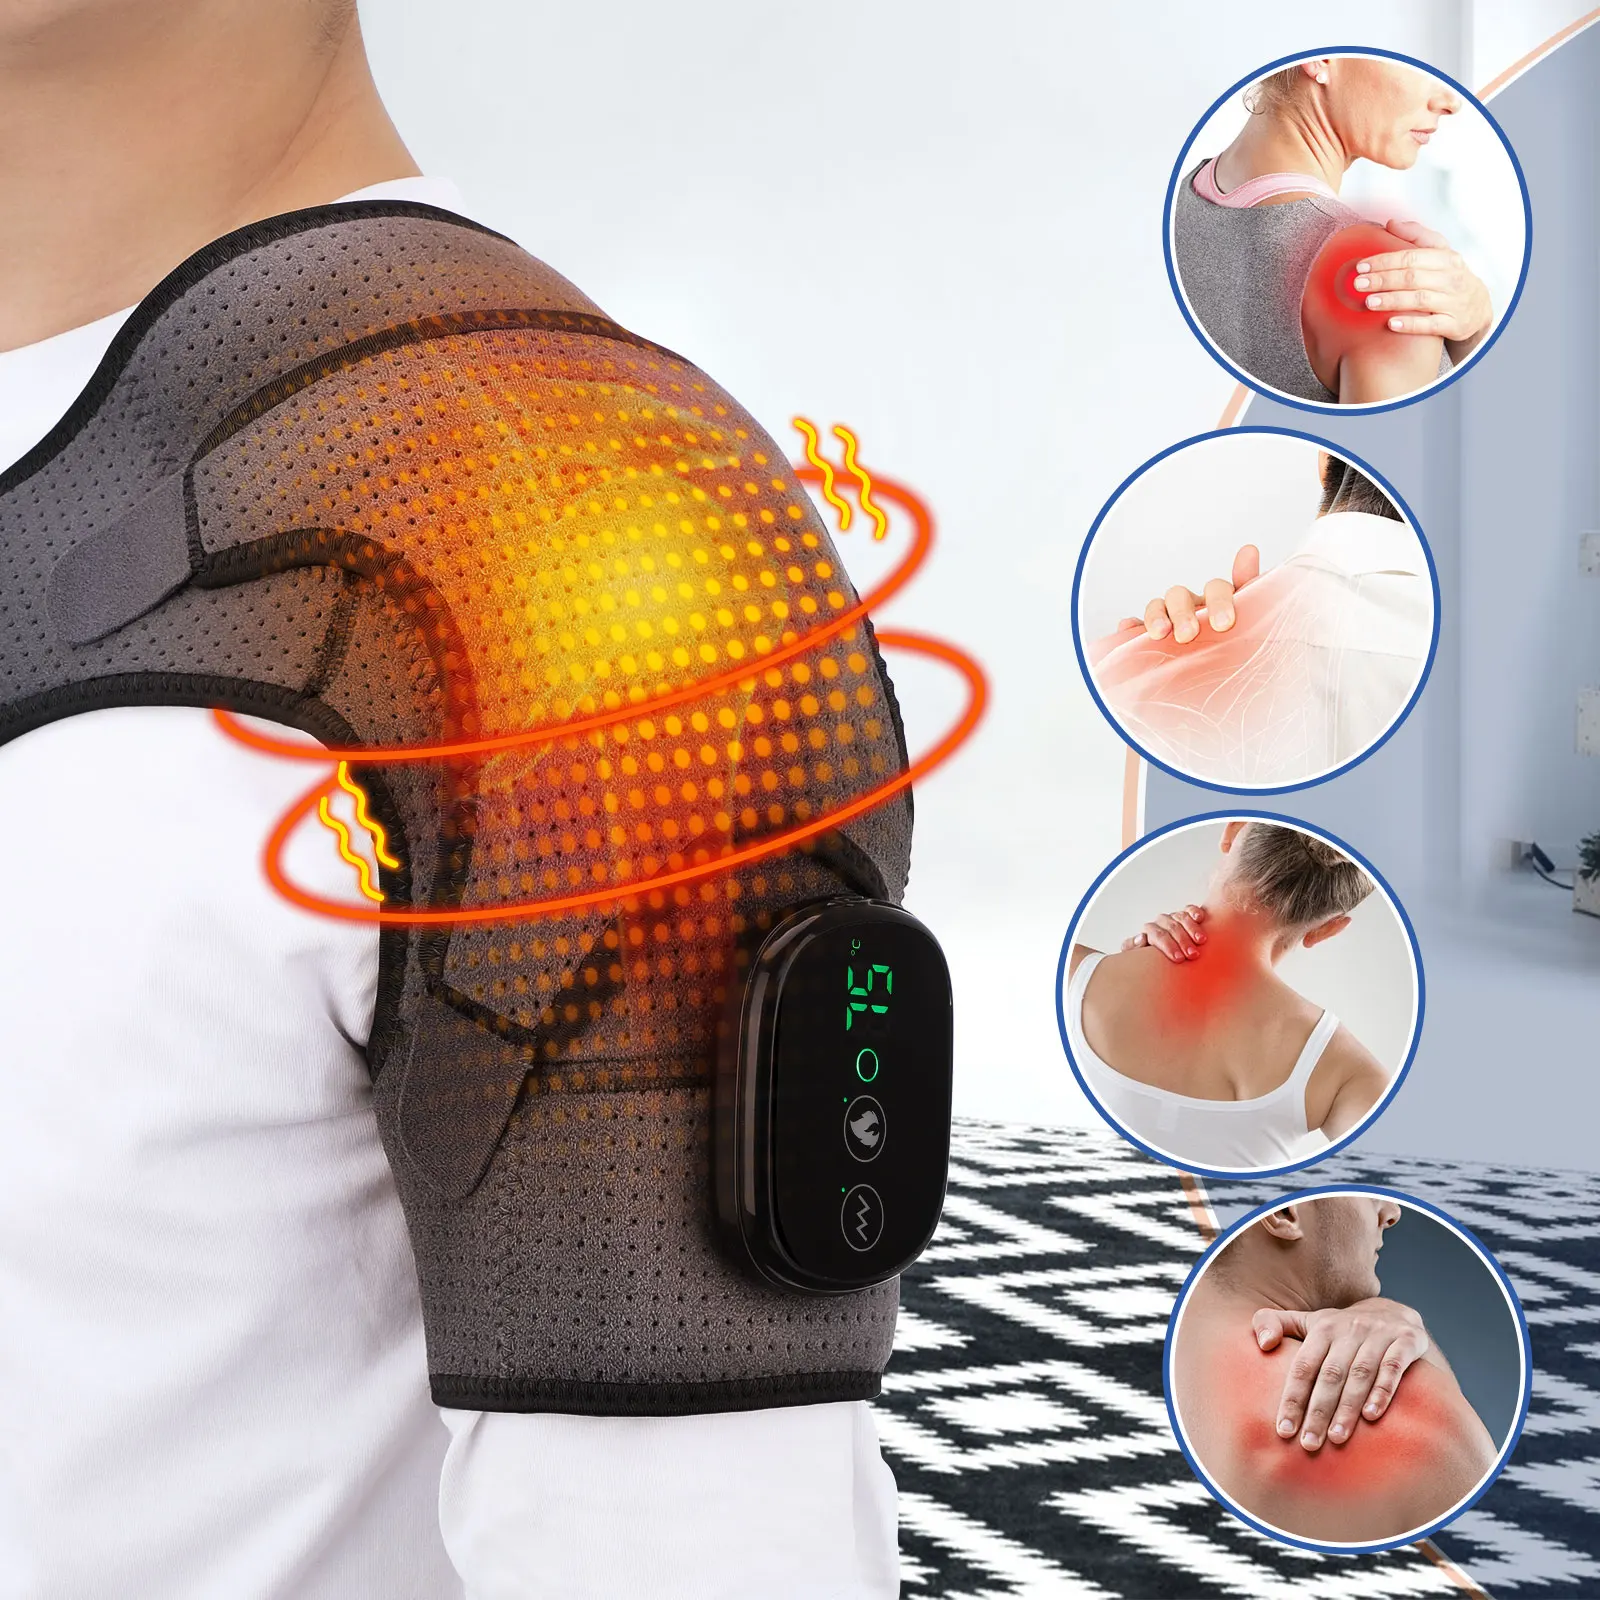 

Heating Vabration Shoulder Massage Brace 3 Levels Physiotherapy Therapy Pain Relief Left Right Electric Recharge Heated Massage